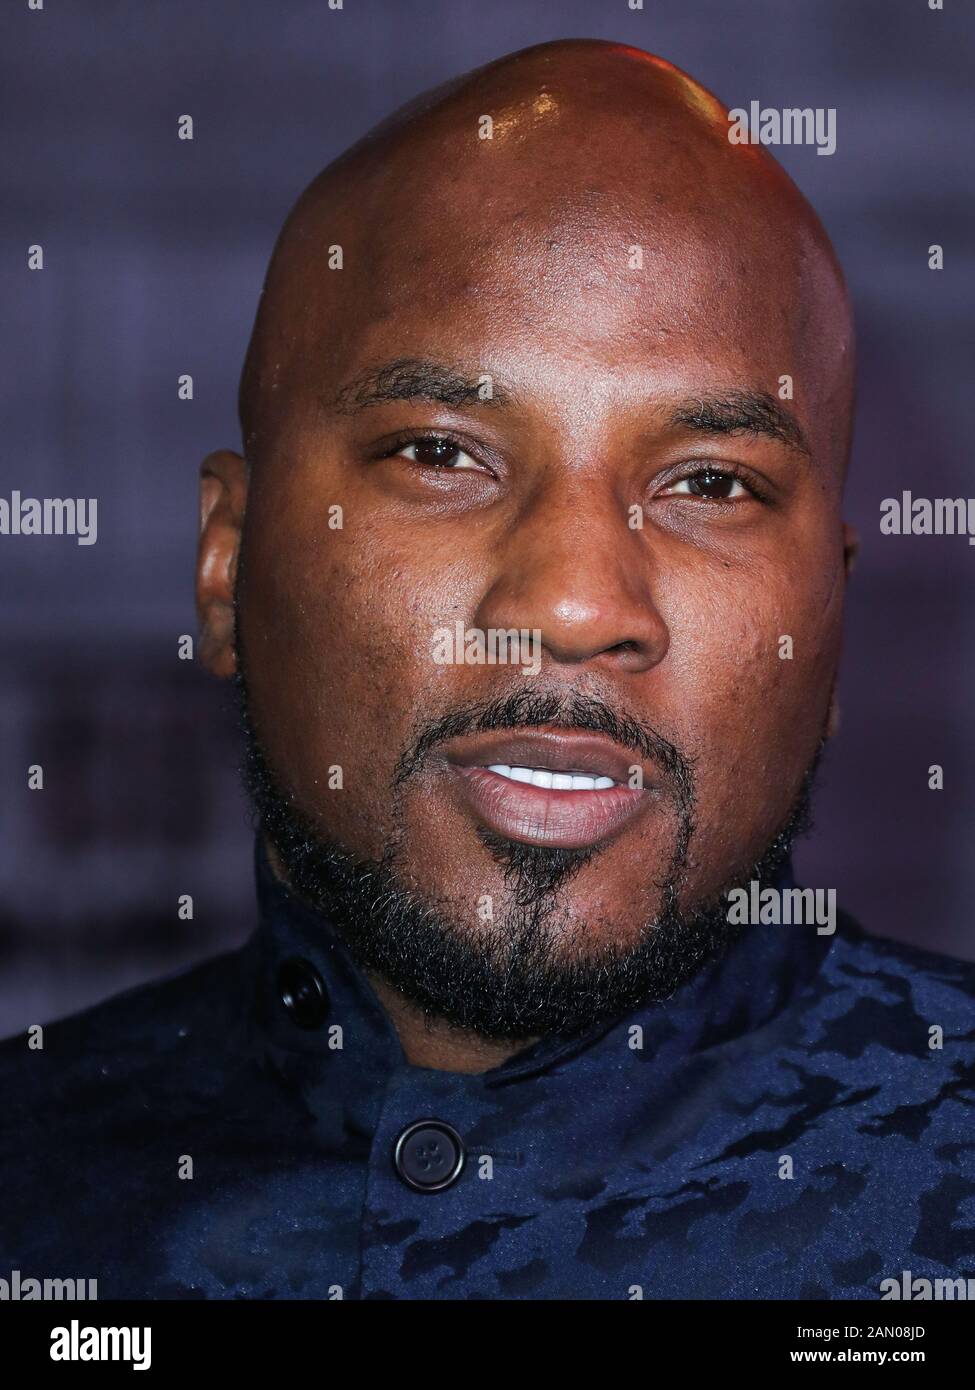 HOLLYWOOD, LOS ANGELES, CALIFORNIA, USA - JANUARY 14: Jeezy arrives at the Los Angeles Premiere Of Columbia Pictures' 'Bad Boys For Life' held at the TCL Chinese Theatre IMAX on January 14, 2020 in Hollywood, Los Angeles, California, United States. (Photo by Xavier Collin/Image Press Agency) Stock Photo